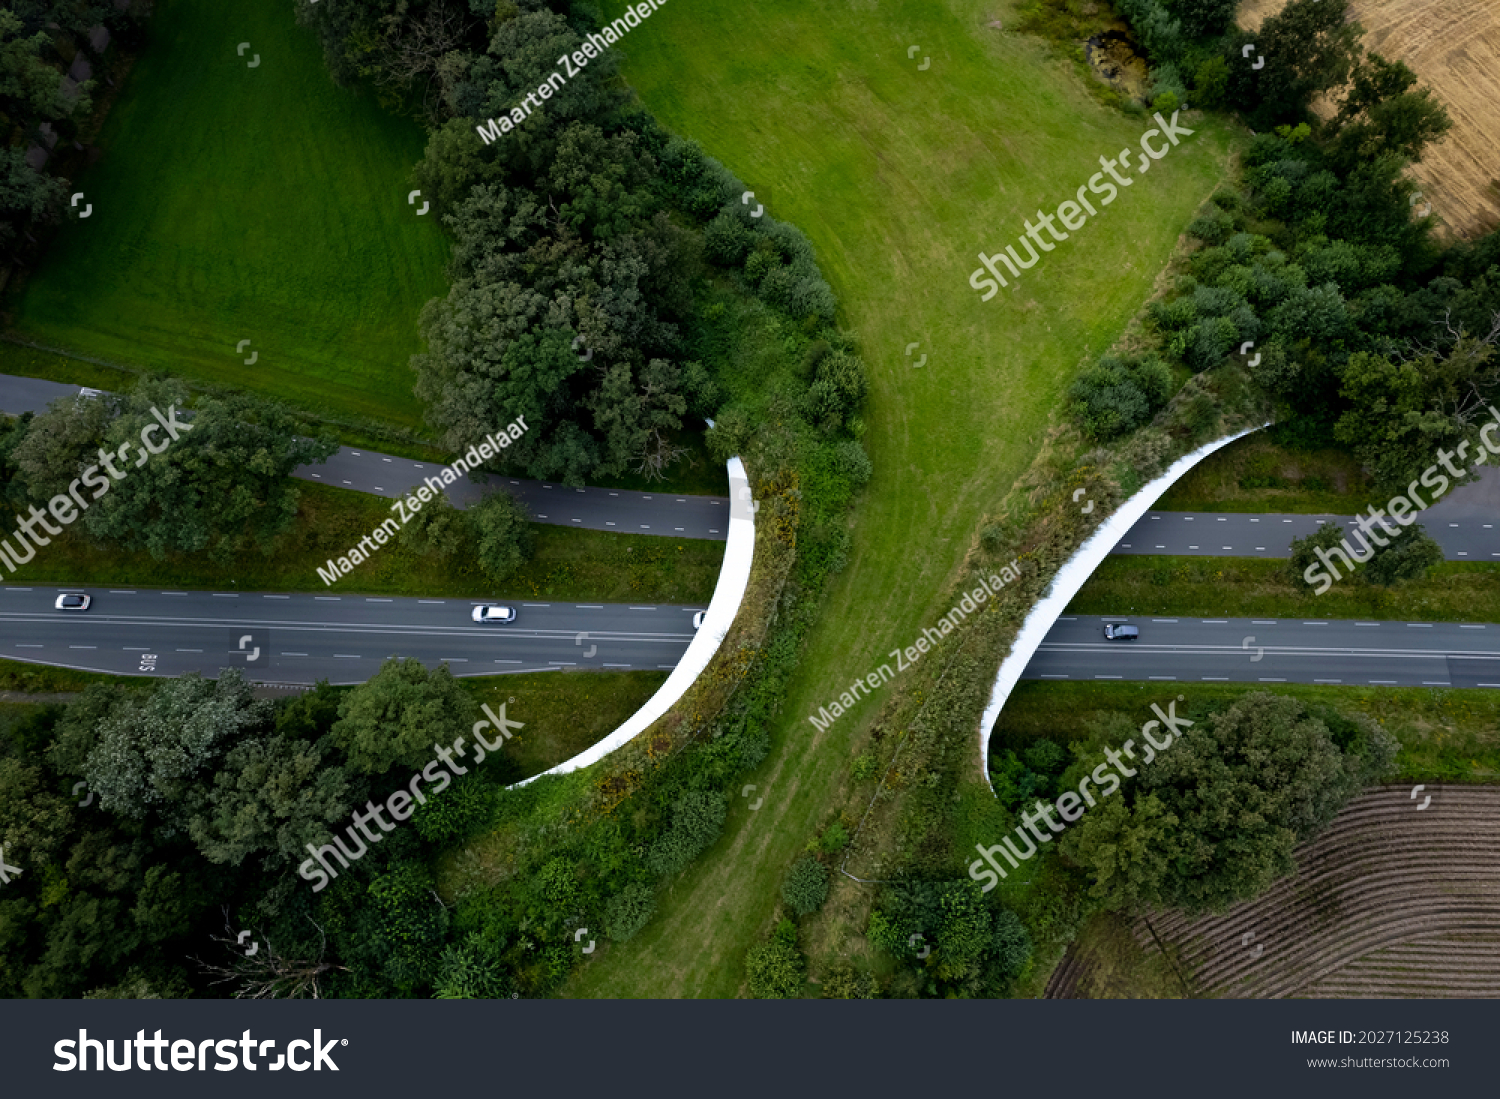 Motorway passing underneath wildlife crossing forming a safe natural corridor bridge for animals to migrate between conservancy areas. Environment nature reserve infrastructure eco passage. #2027125238